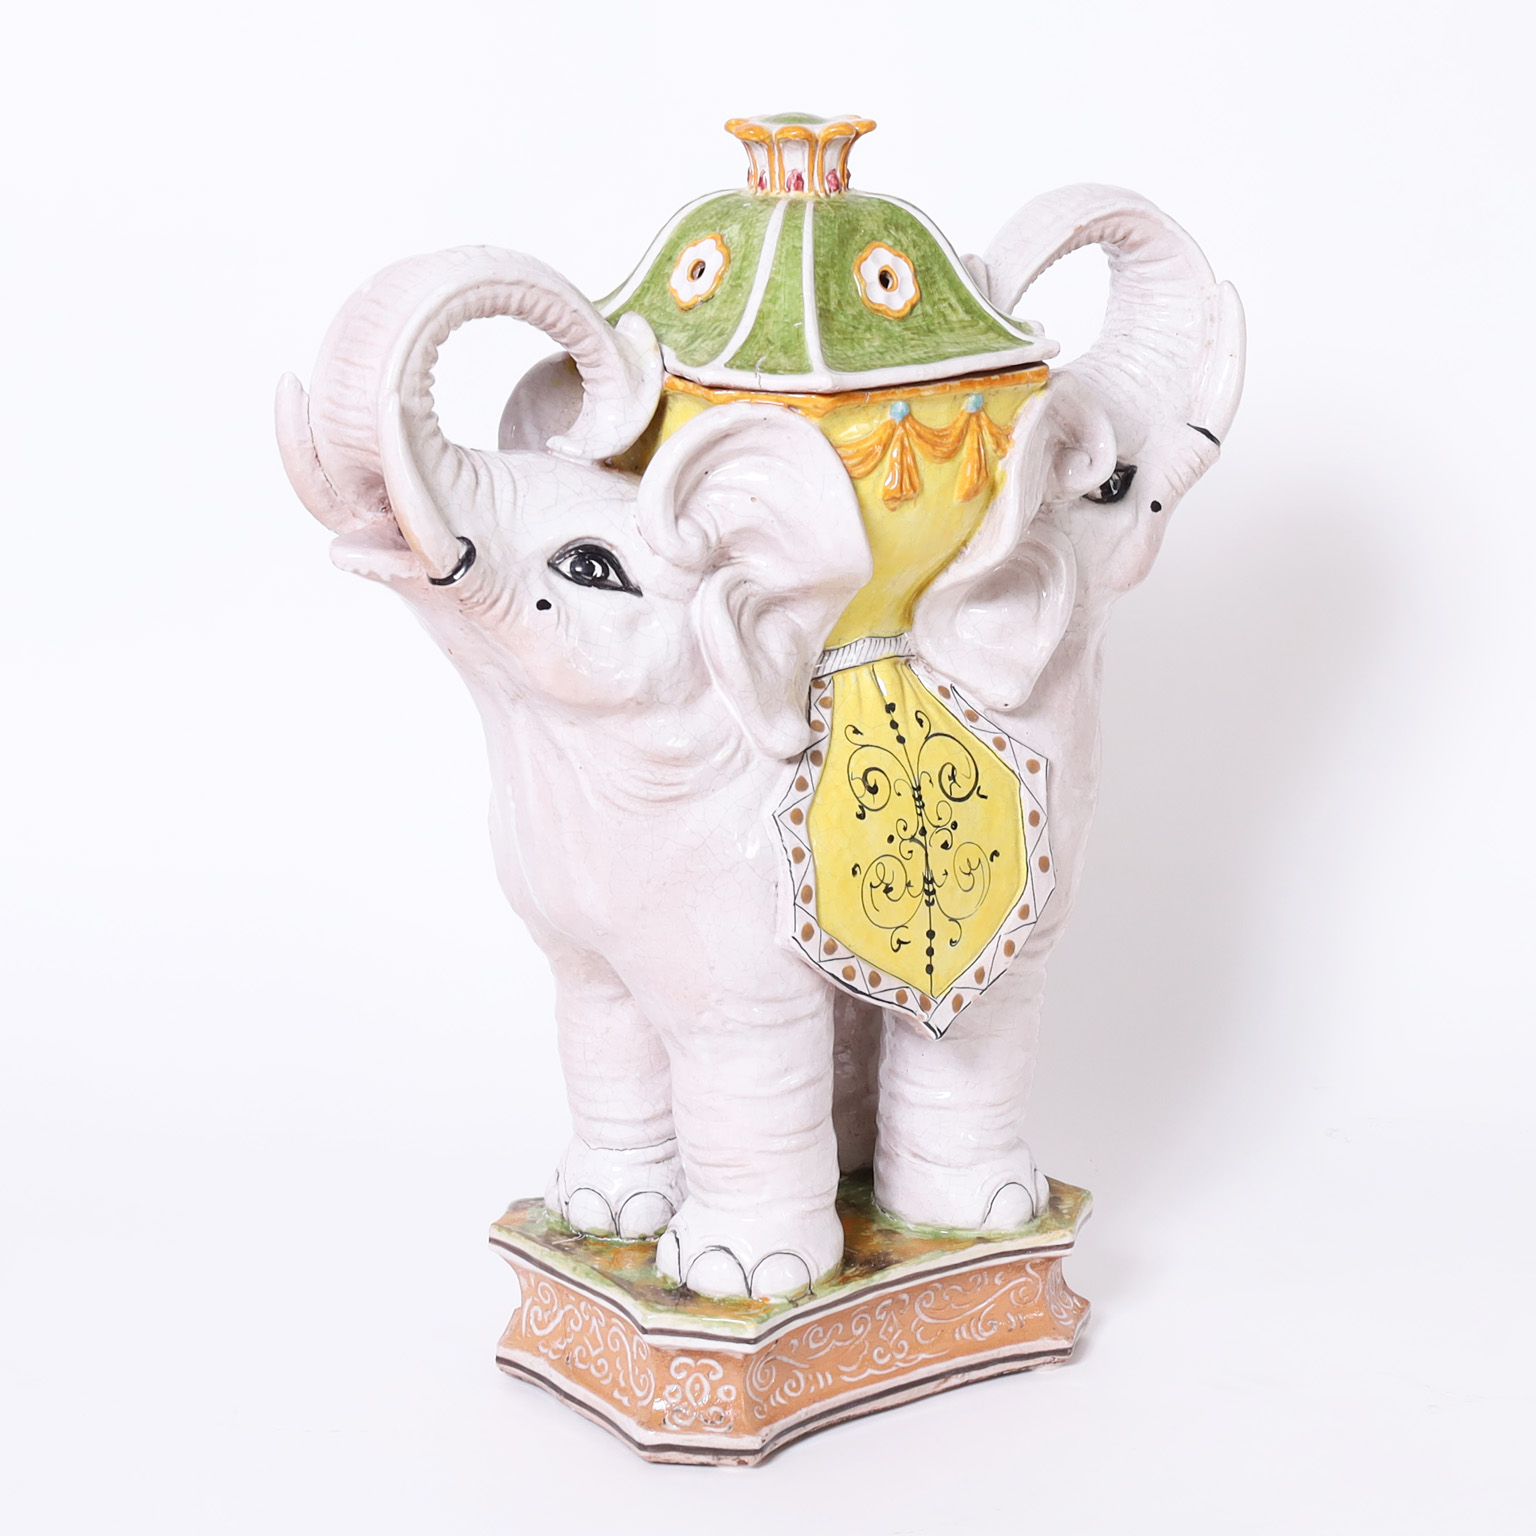 Glazed Terra Cotta Elephant Stand with Lidded Compartment